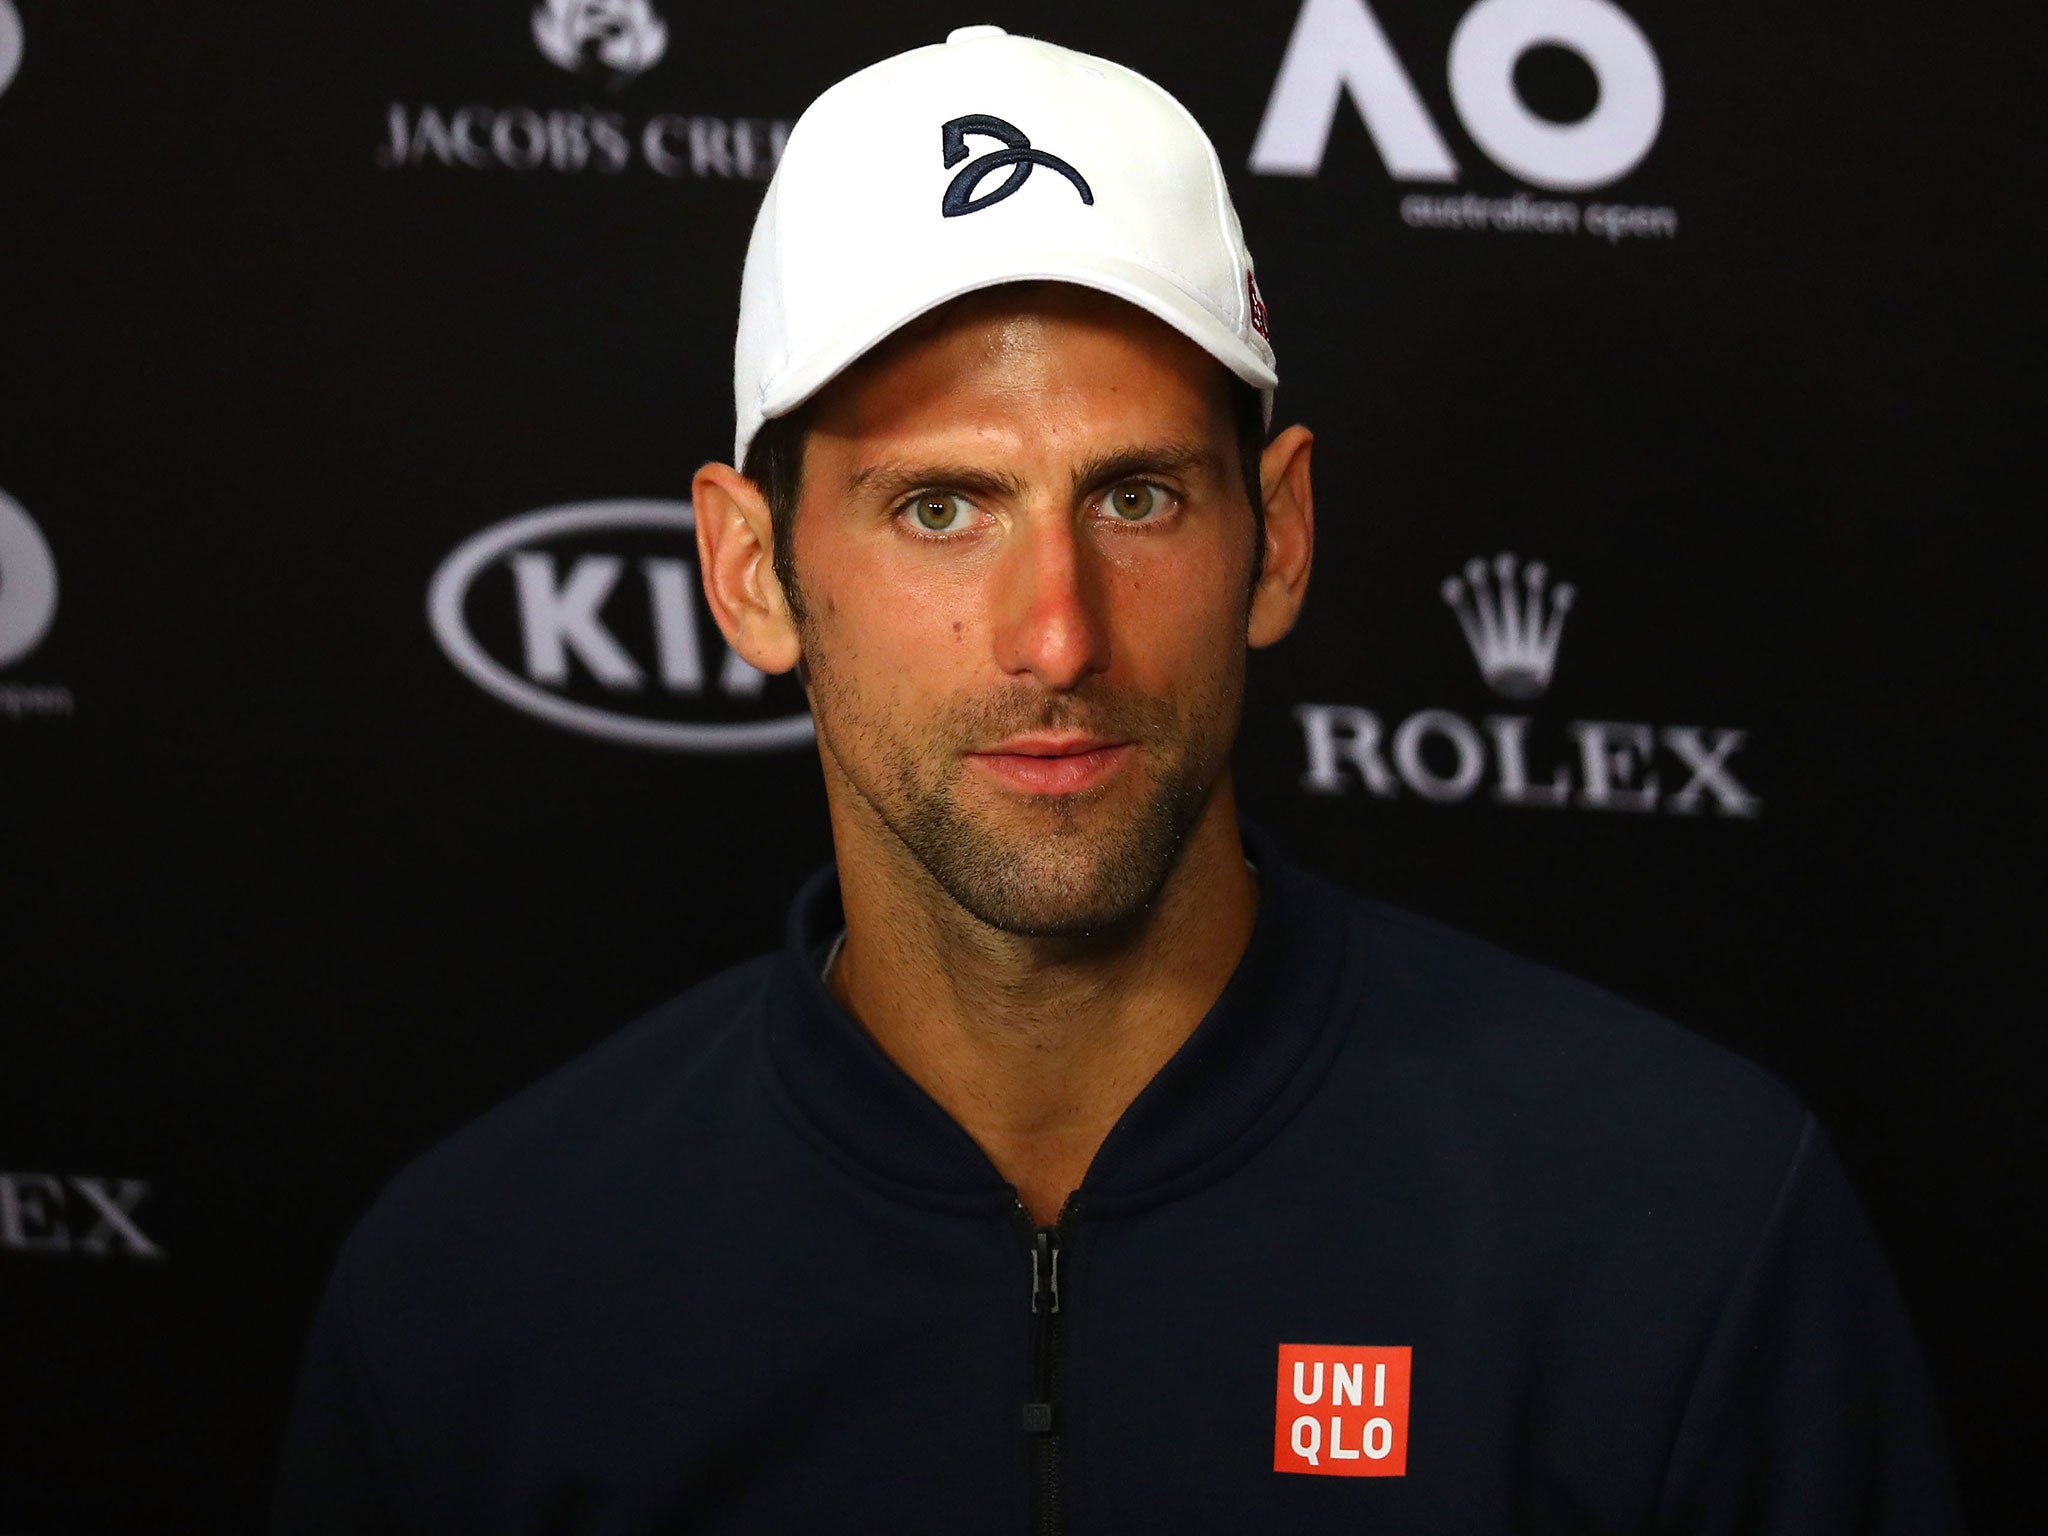 Novak Djokovic defended his motivation for this year's Australian Open after suffering a second round defeat